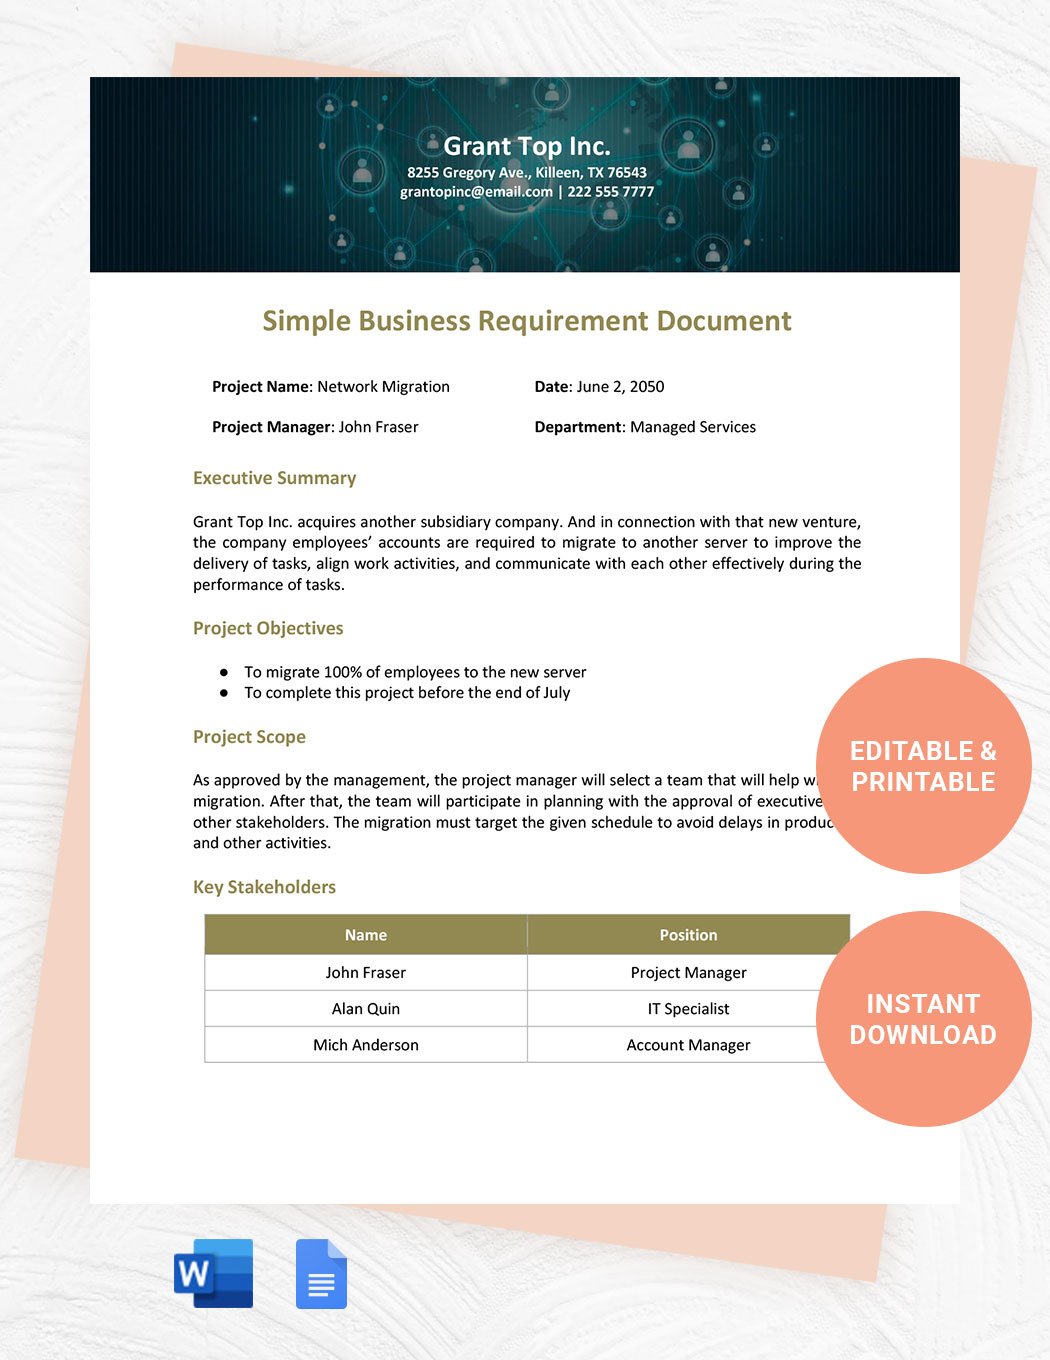 Simple Business Requirements Document Template